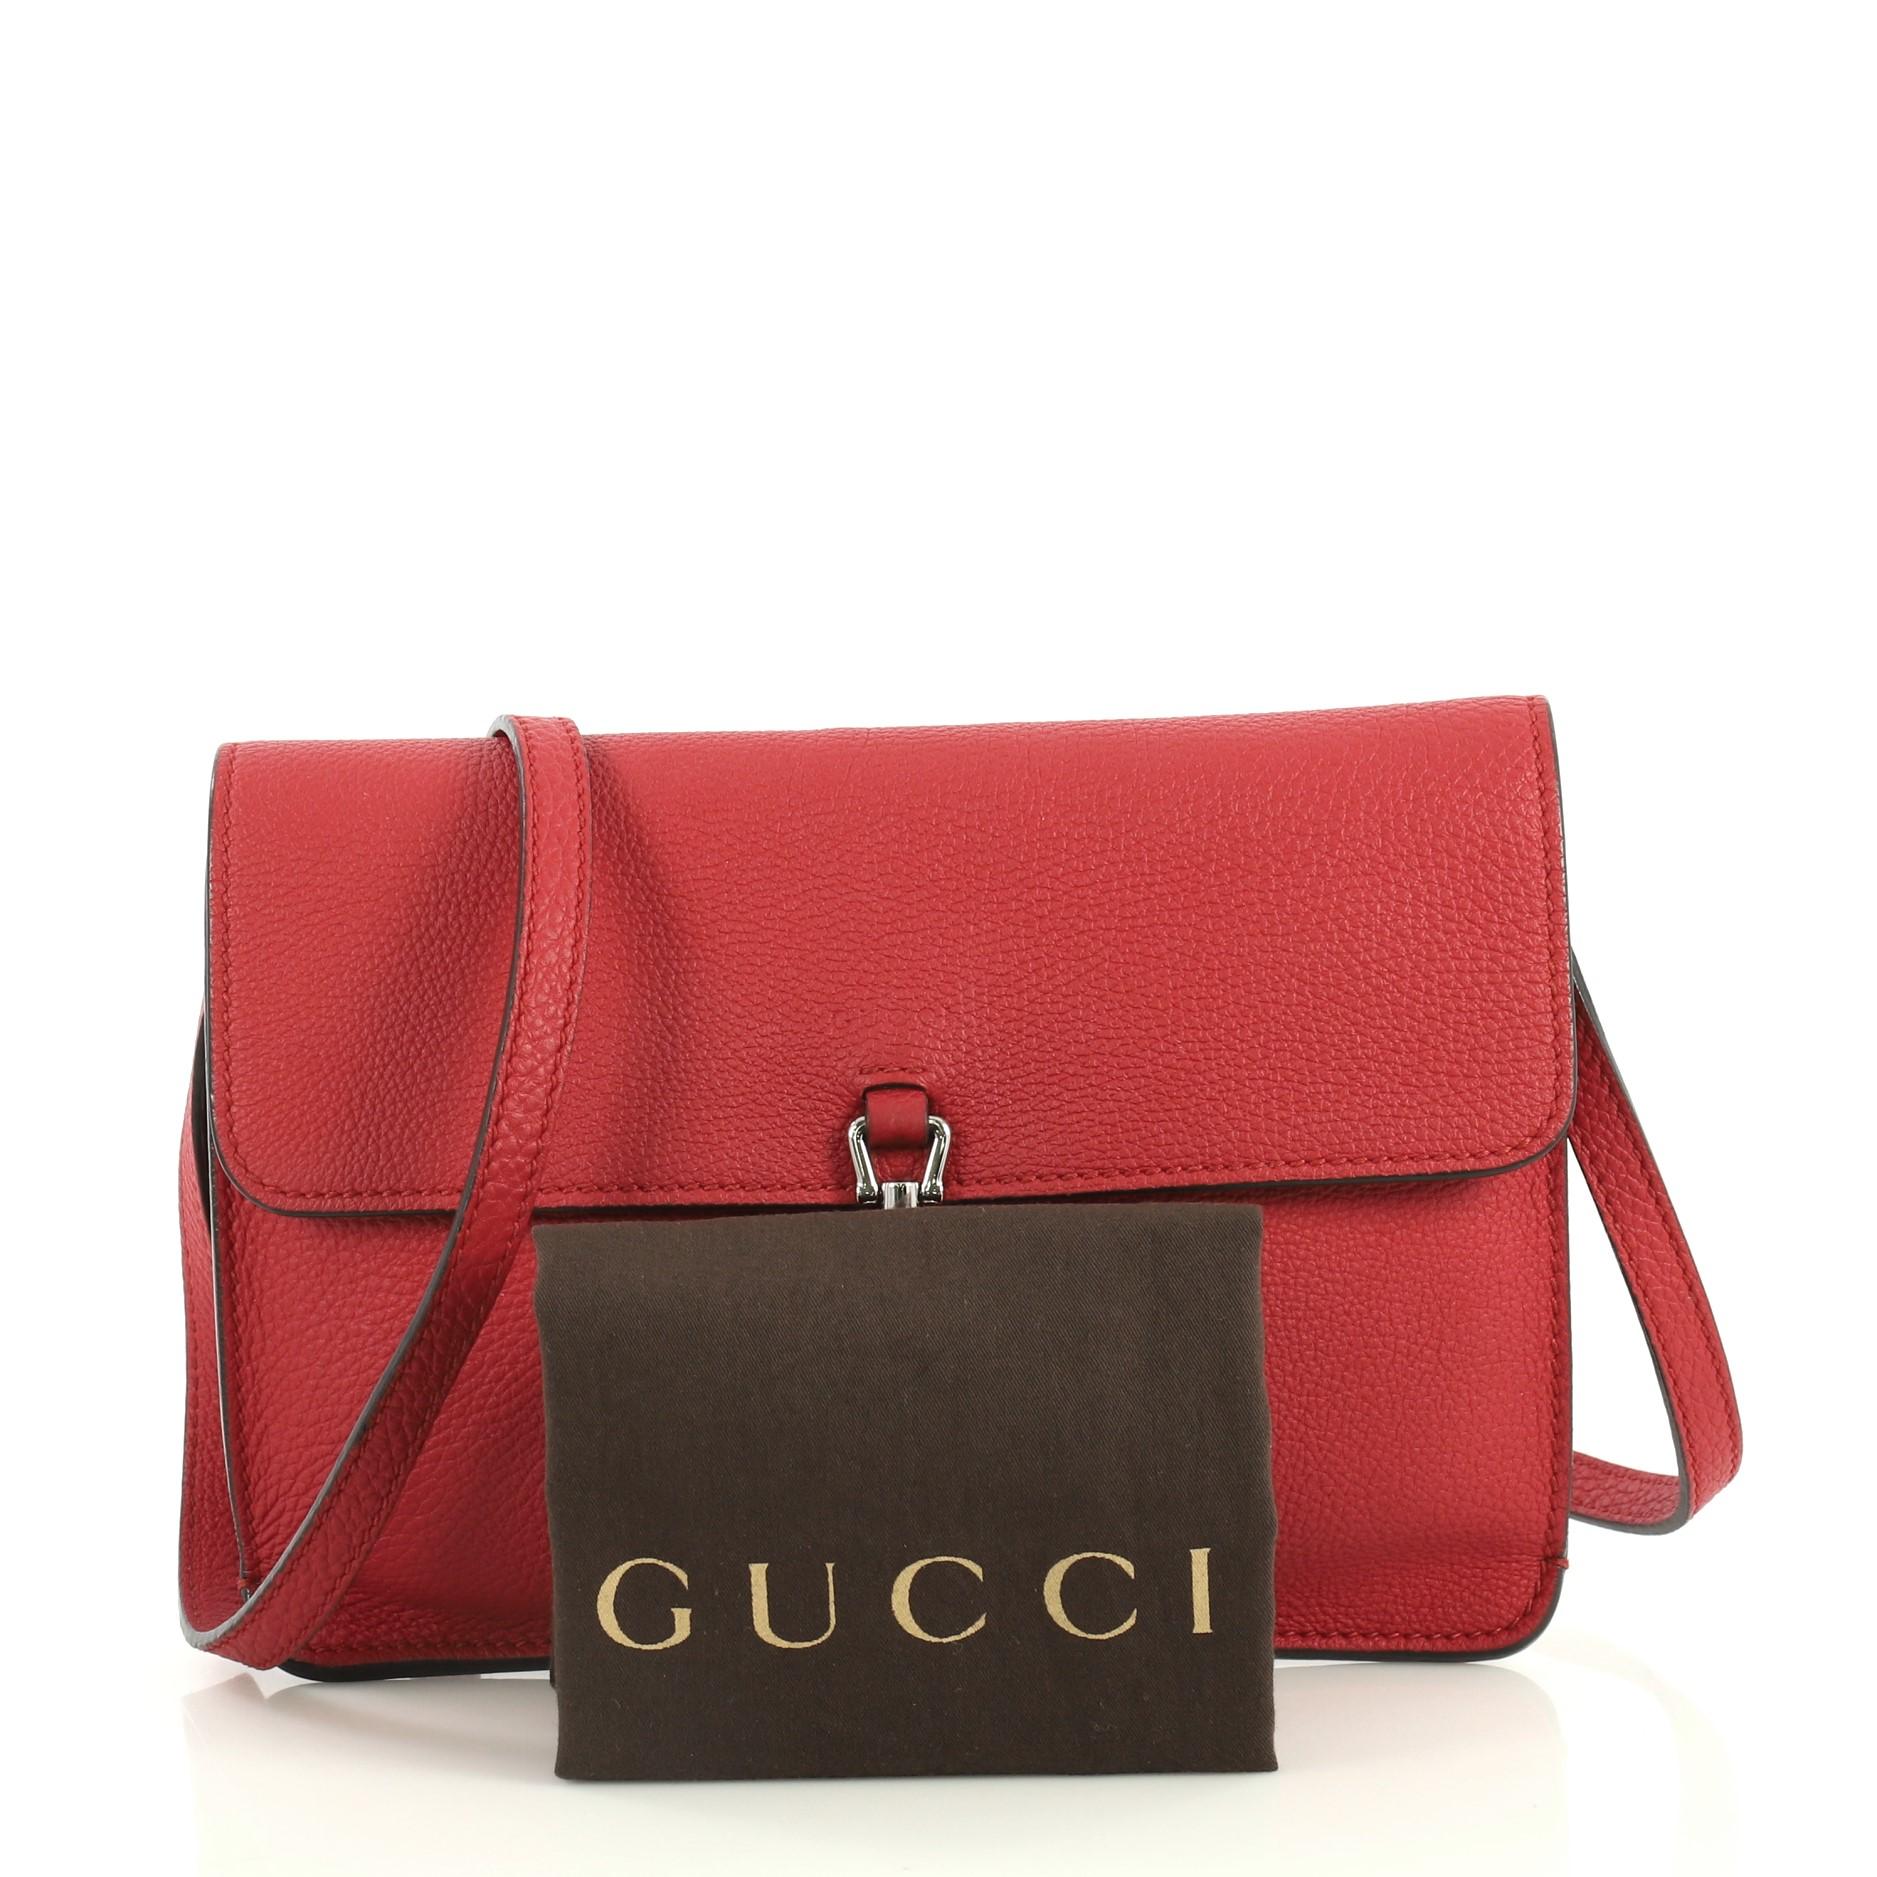 This Gucci Jackie Soft Convertible Clutch Leather Mini, crafted from red leather, features frontal flap, long adjustable strap and silver-tone hardware. Its pistol lock closure opens to a red suede and leather interior with slip pocket. 

Estimated